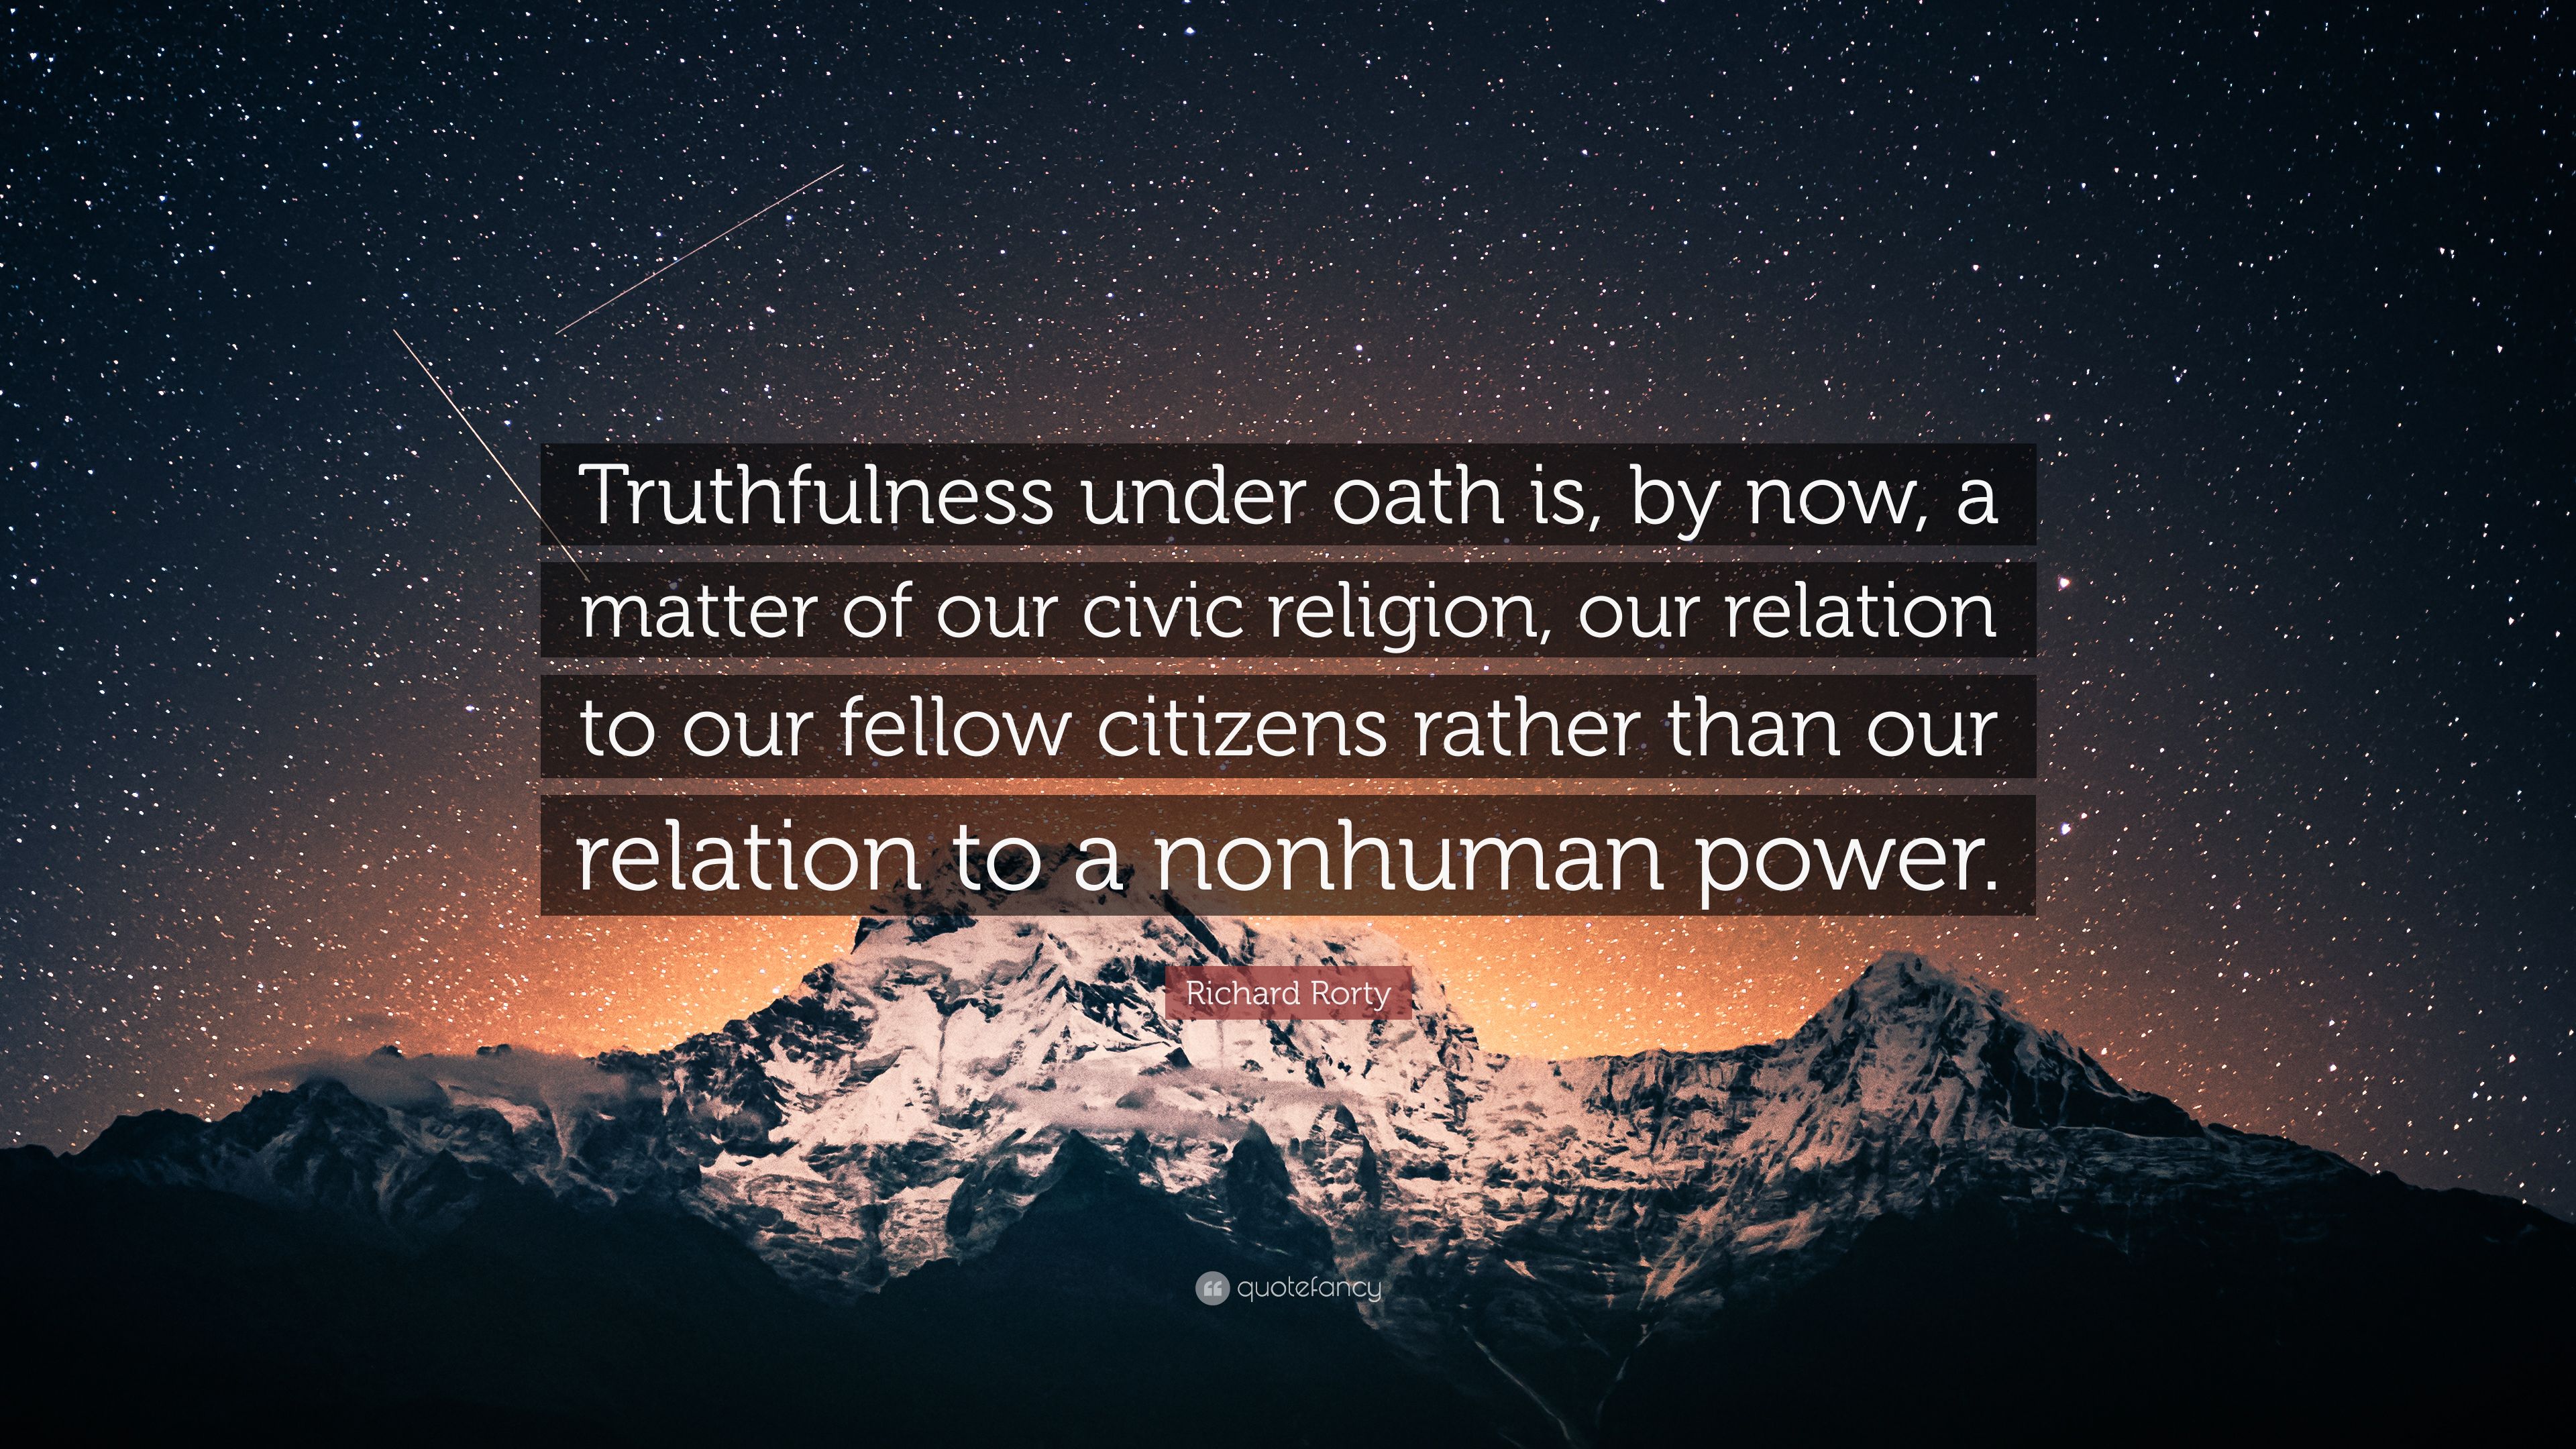 Richard Rorty Quote: “Truthfulness under oath is, by now, a matter